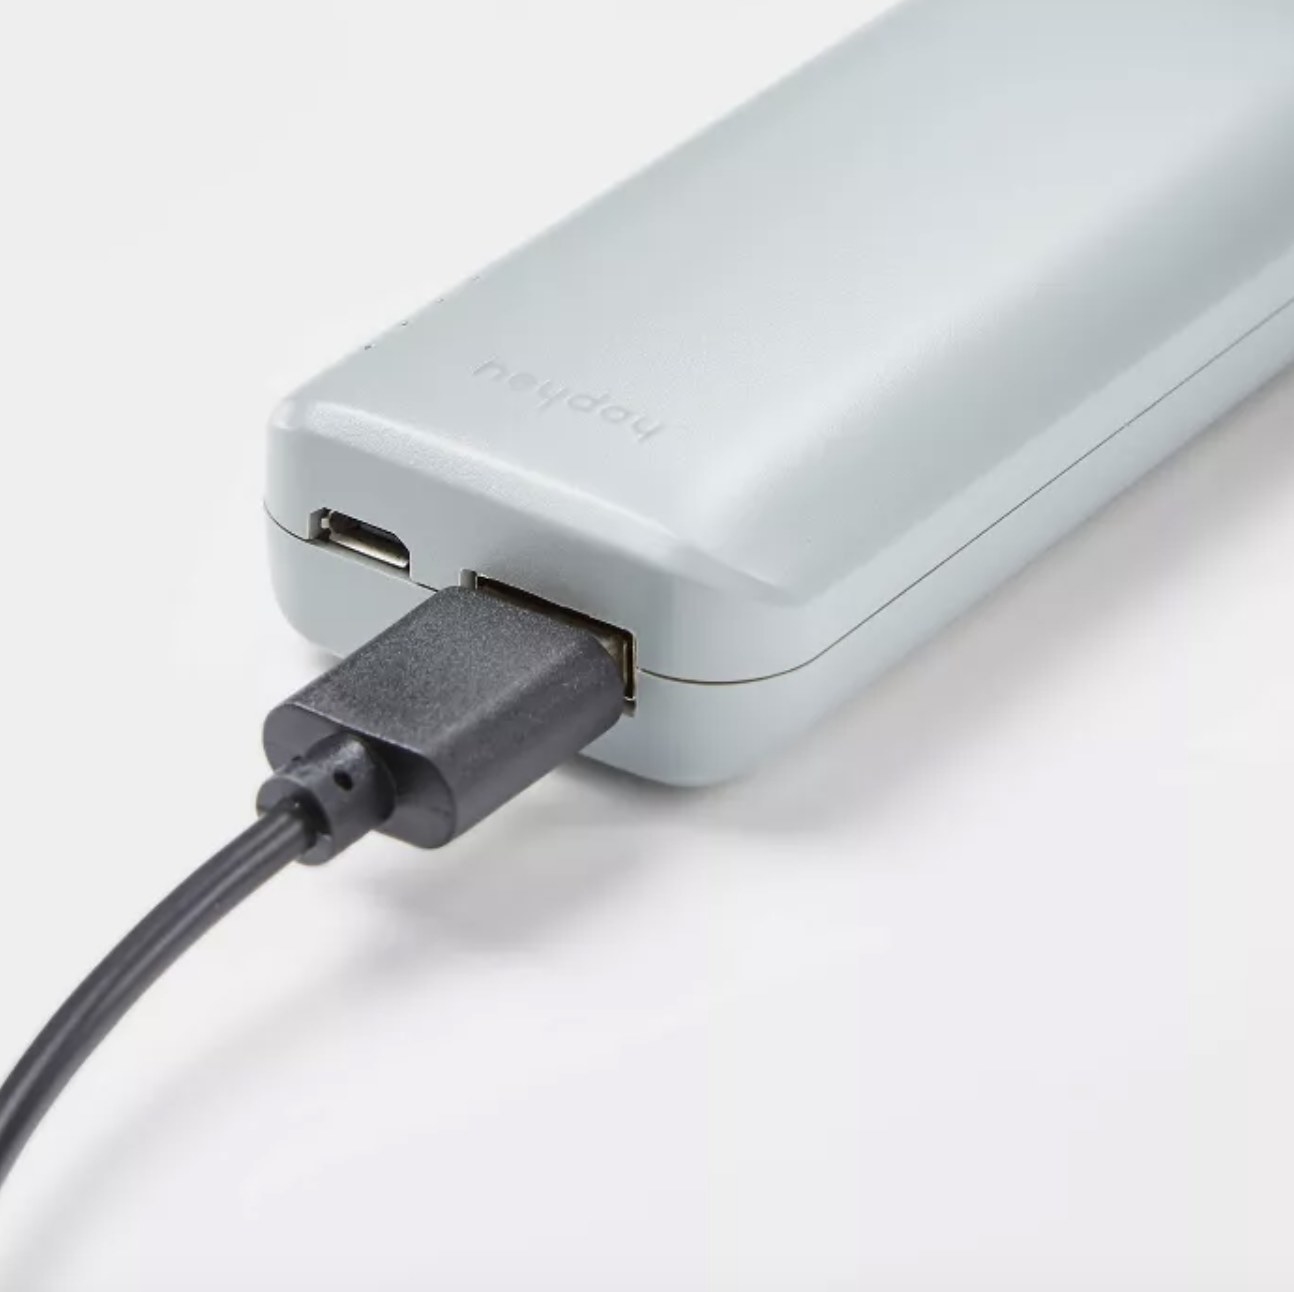 the power bank with a USB plugged in